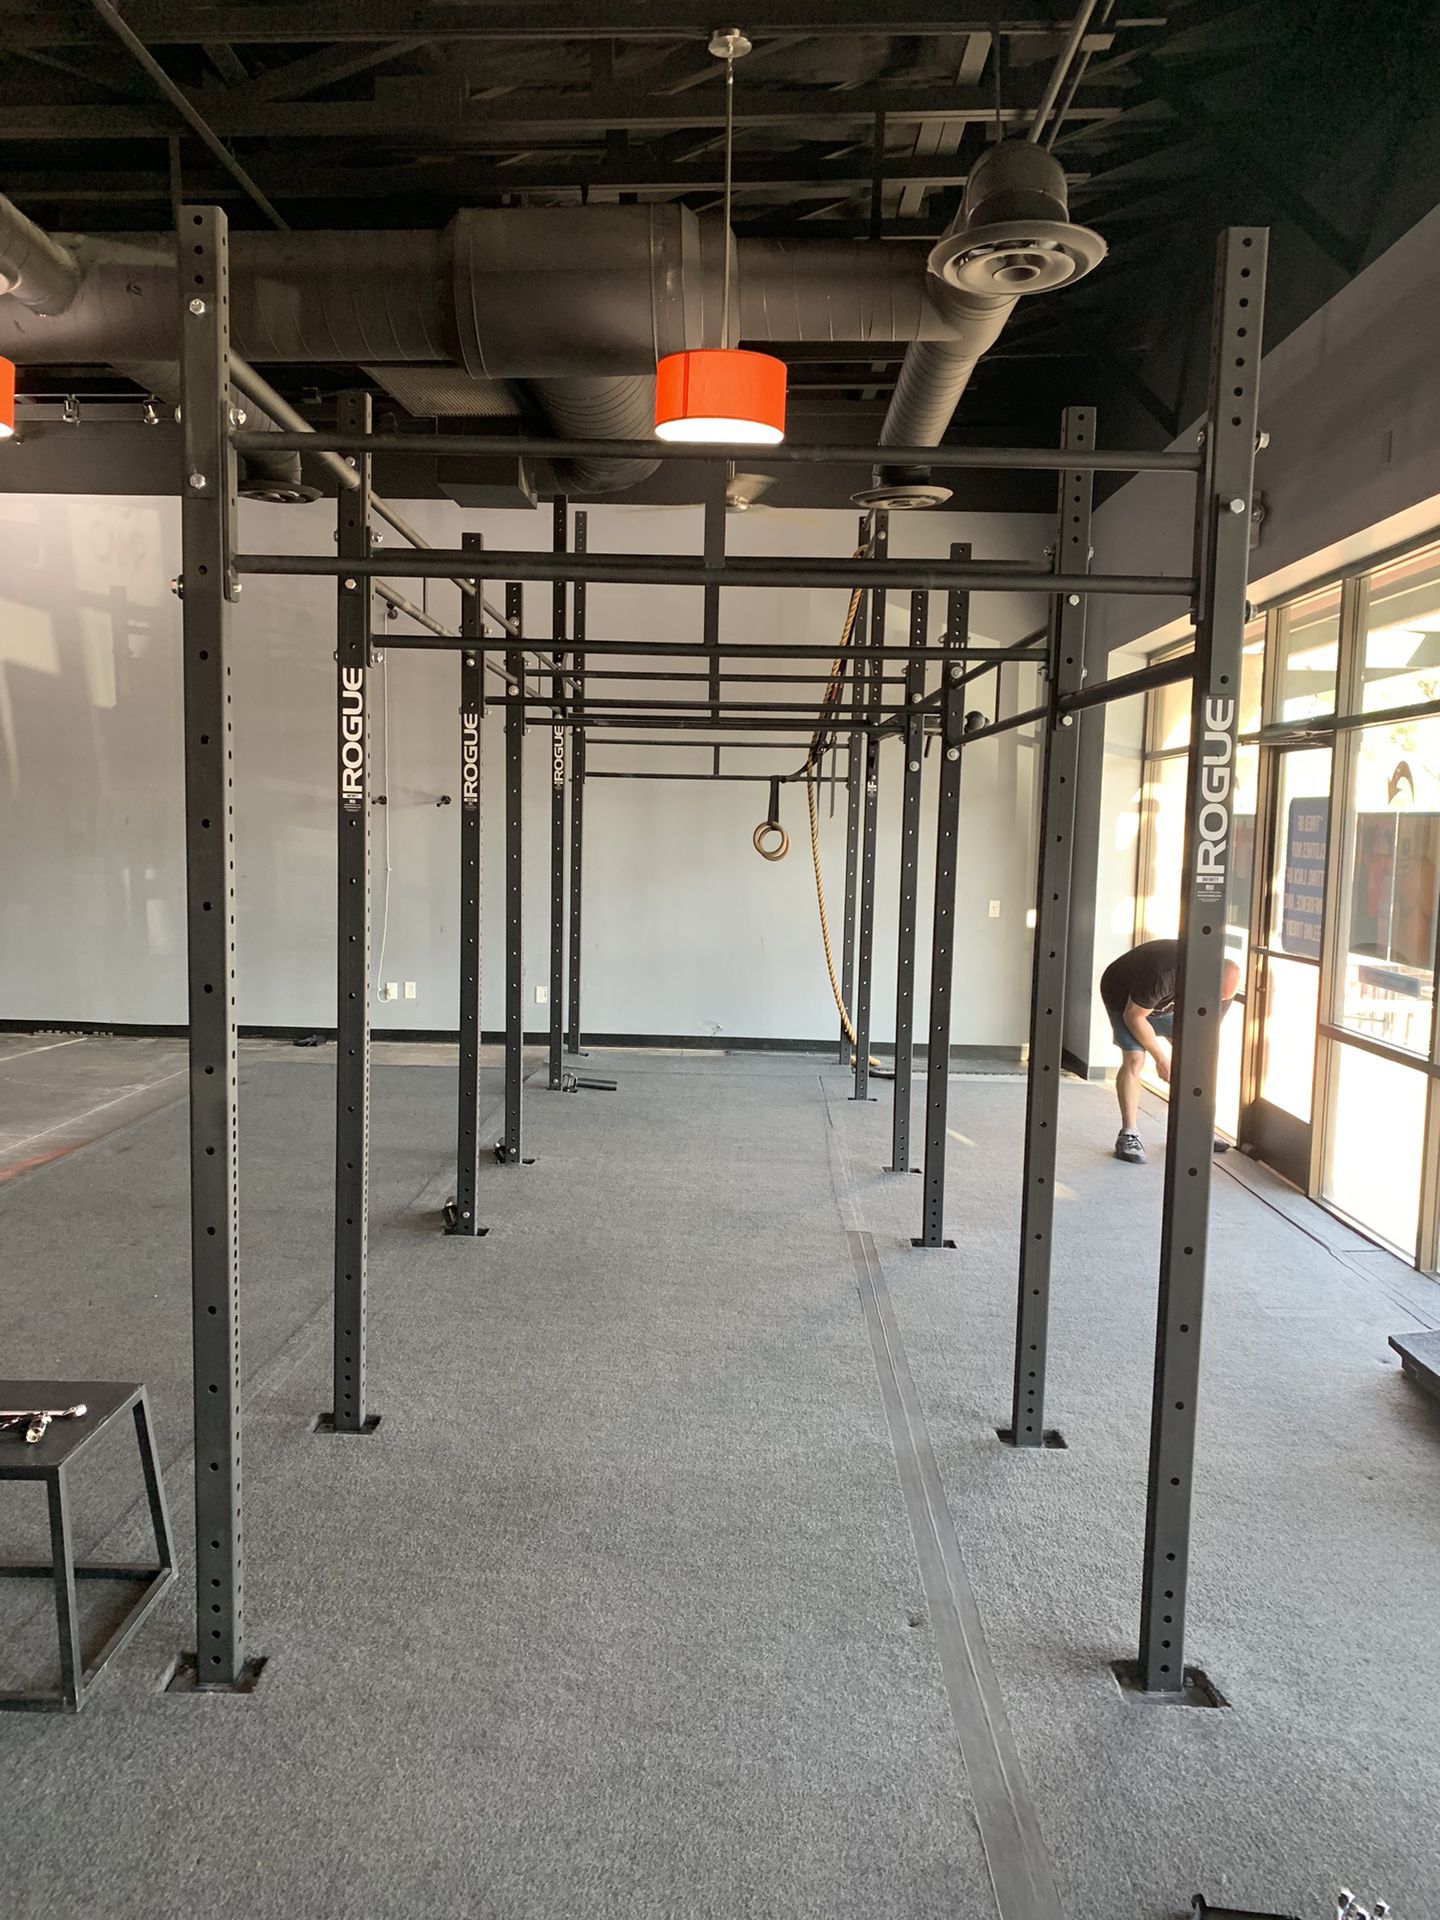 Rogue Infinity Squat Rack/ Rig CrossFit or Home Gym (Delivery Possible)